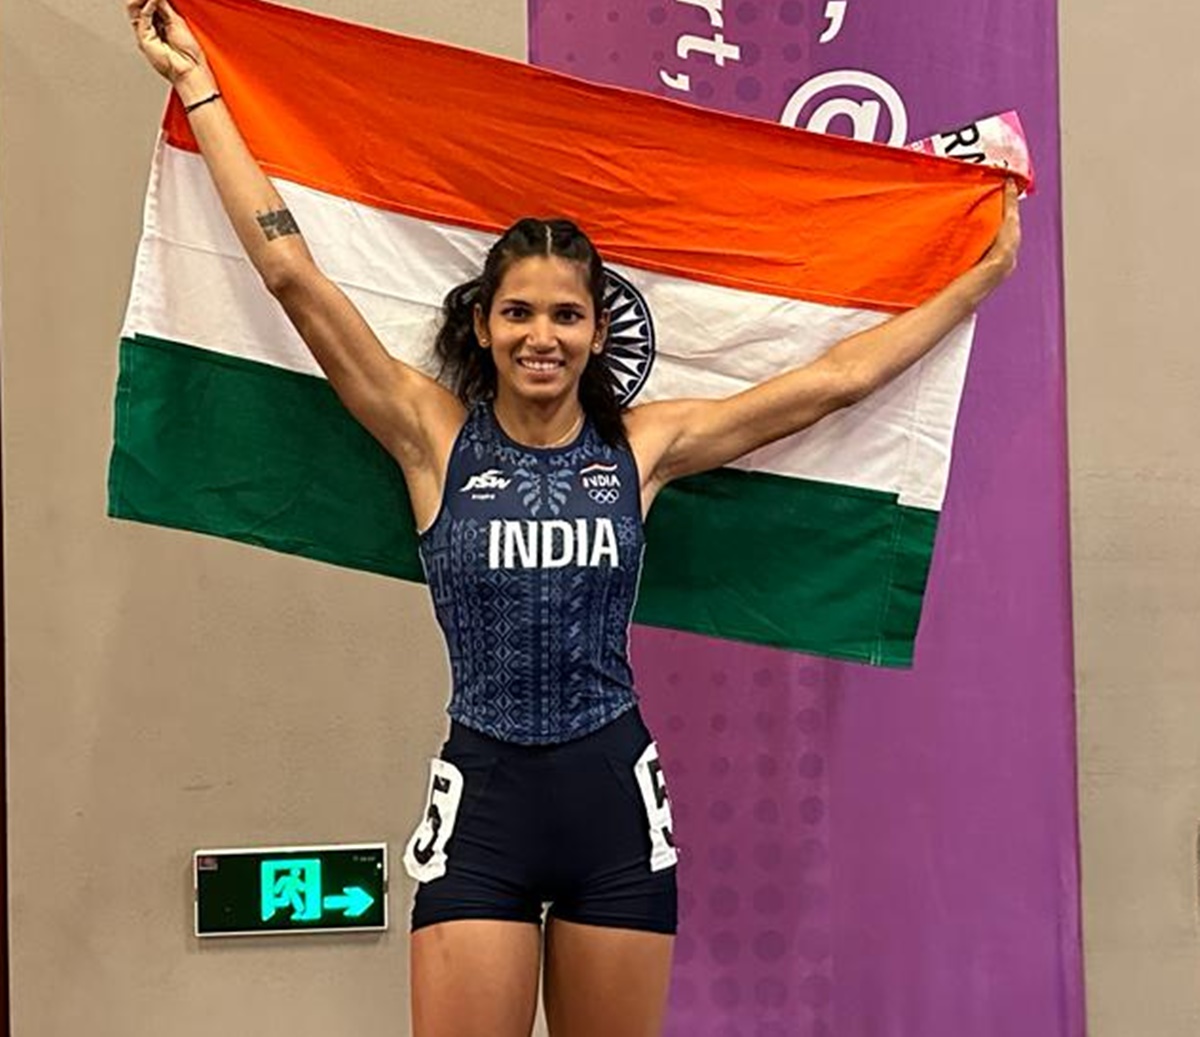 How Jyothi Yarraji’s disqualification turned into silver medal